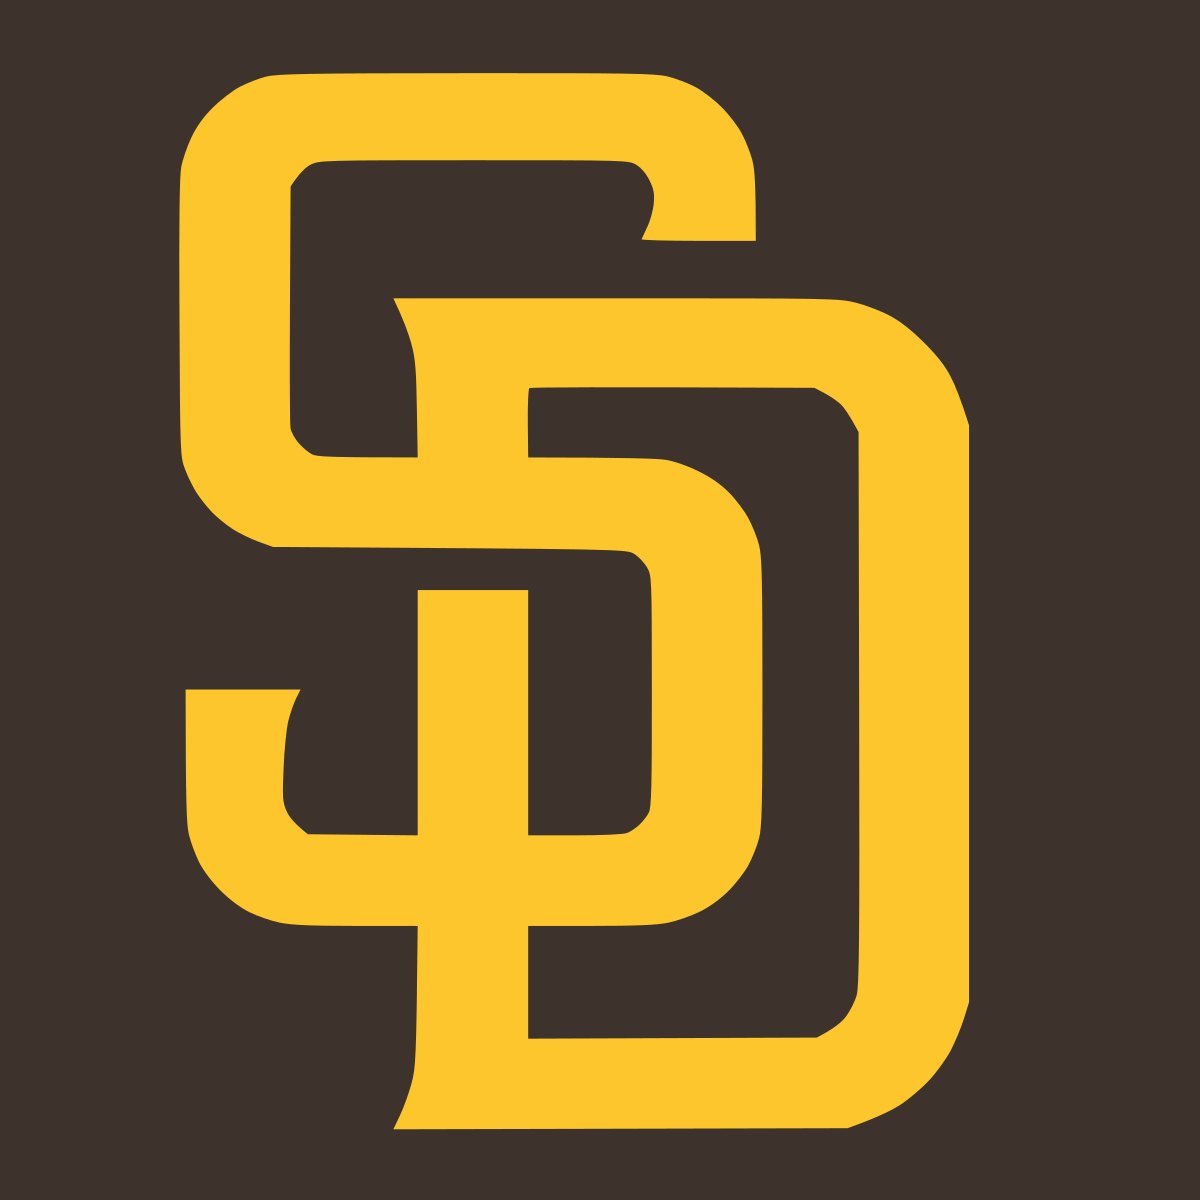 Padres are first MLB team to reach uniform ad deal with Motorola